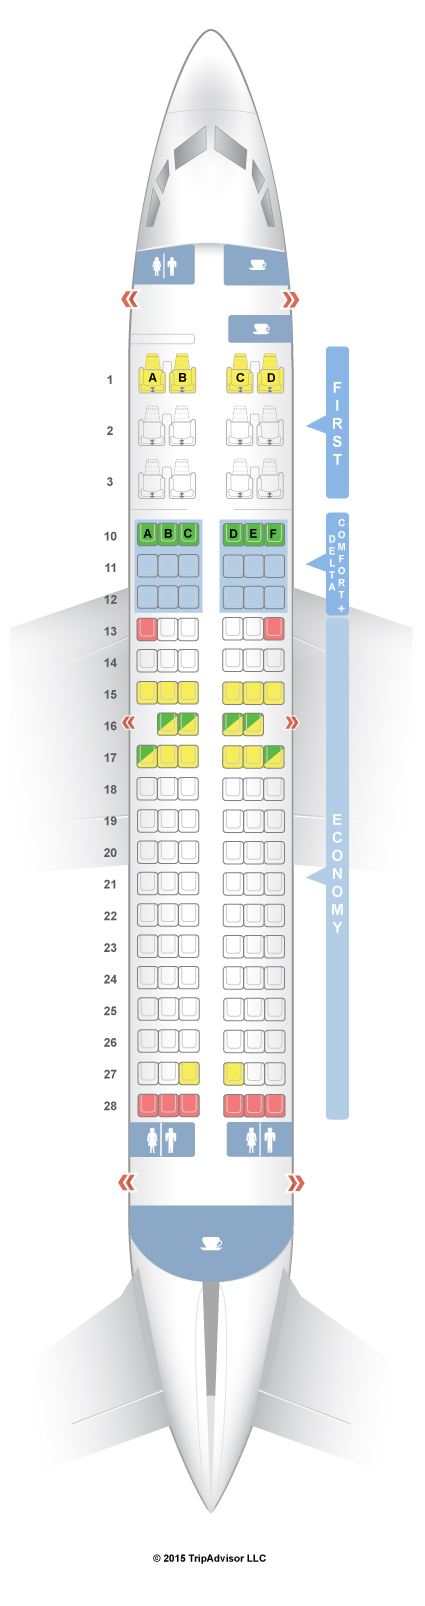 What are the different types of seats available on a Delta plane?